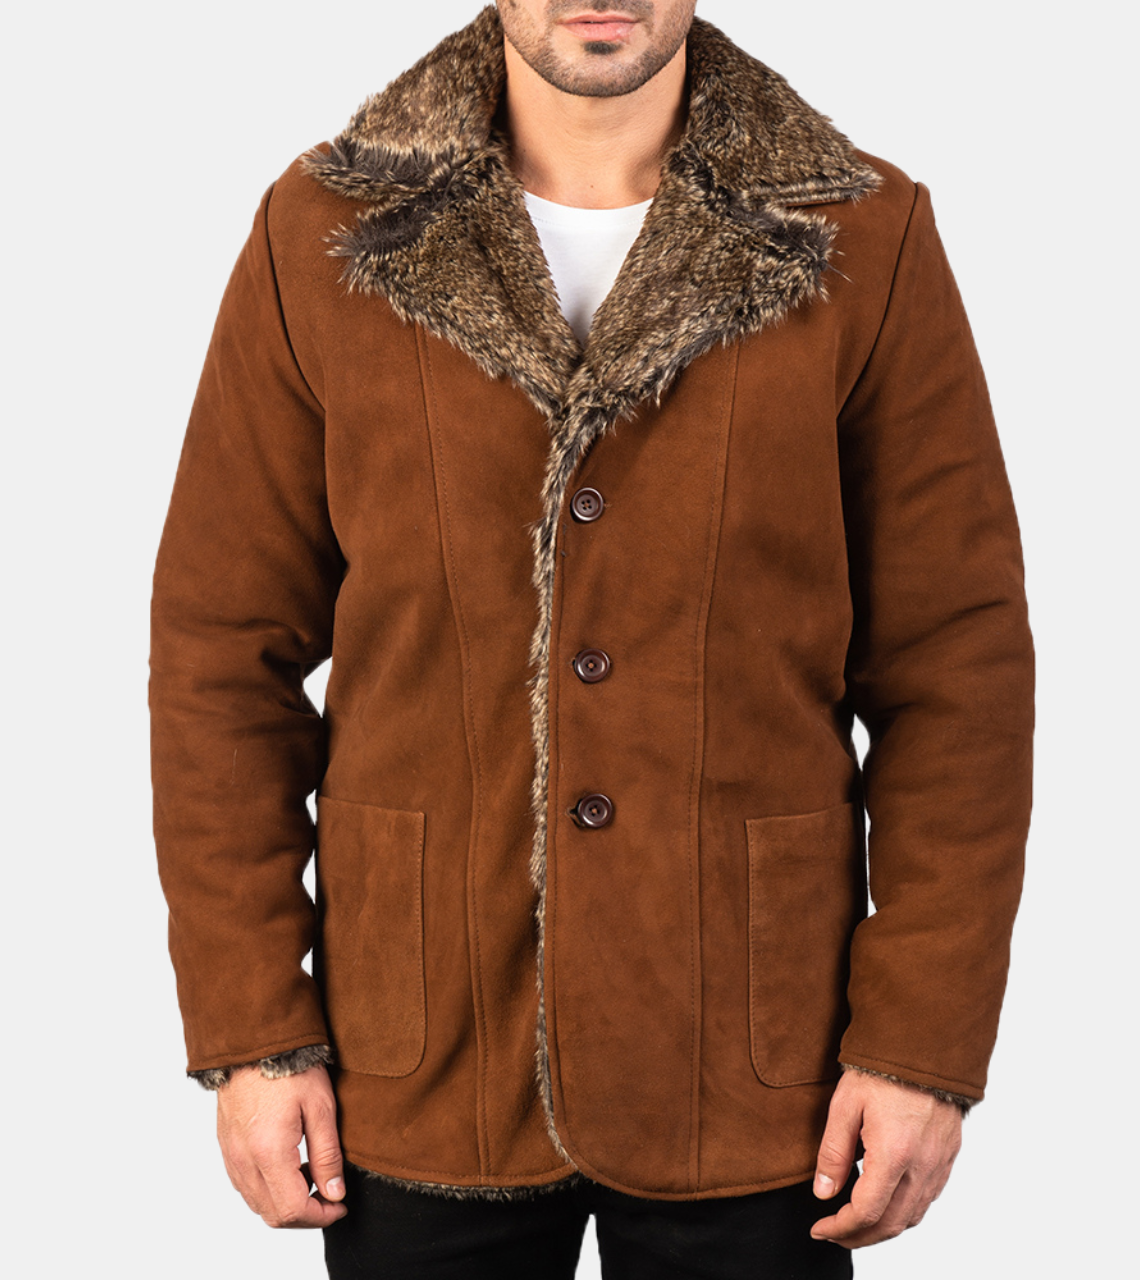 Weston Men's Brown Shearling Suede Leather Jacket